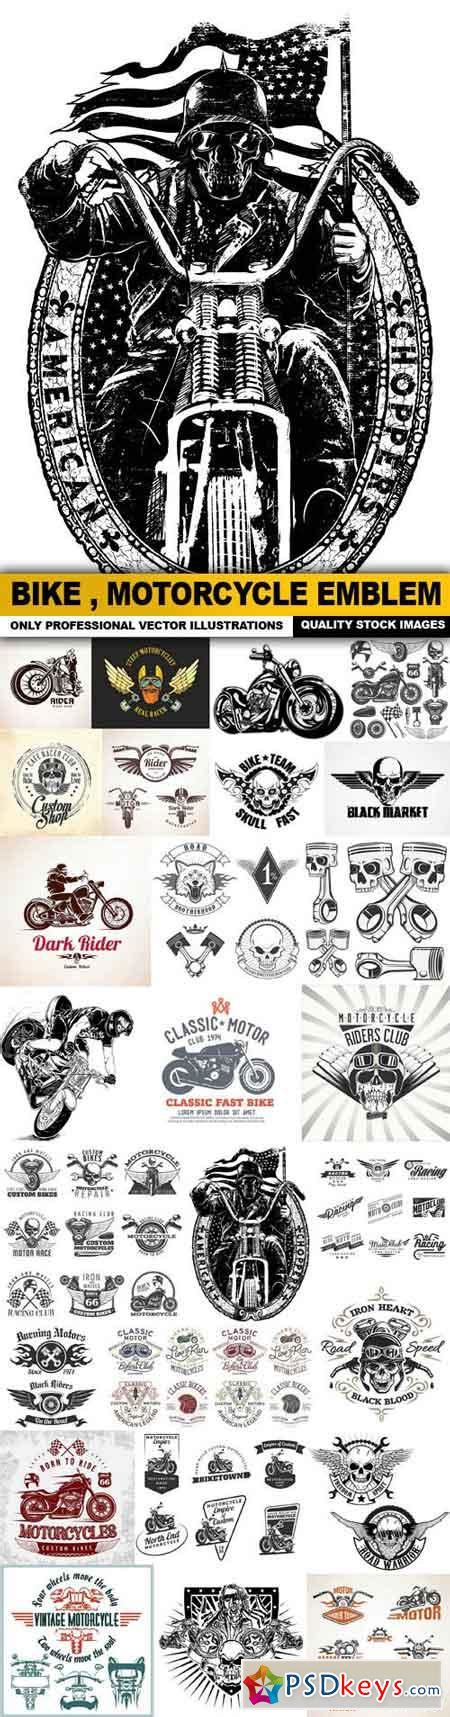 Bike Motorcycle Emblem Collection 26 Vector Free Download